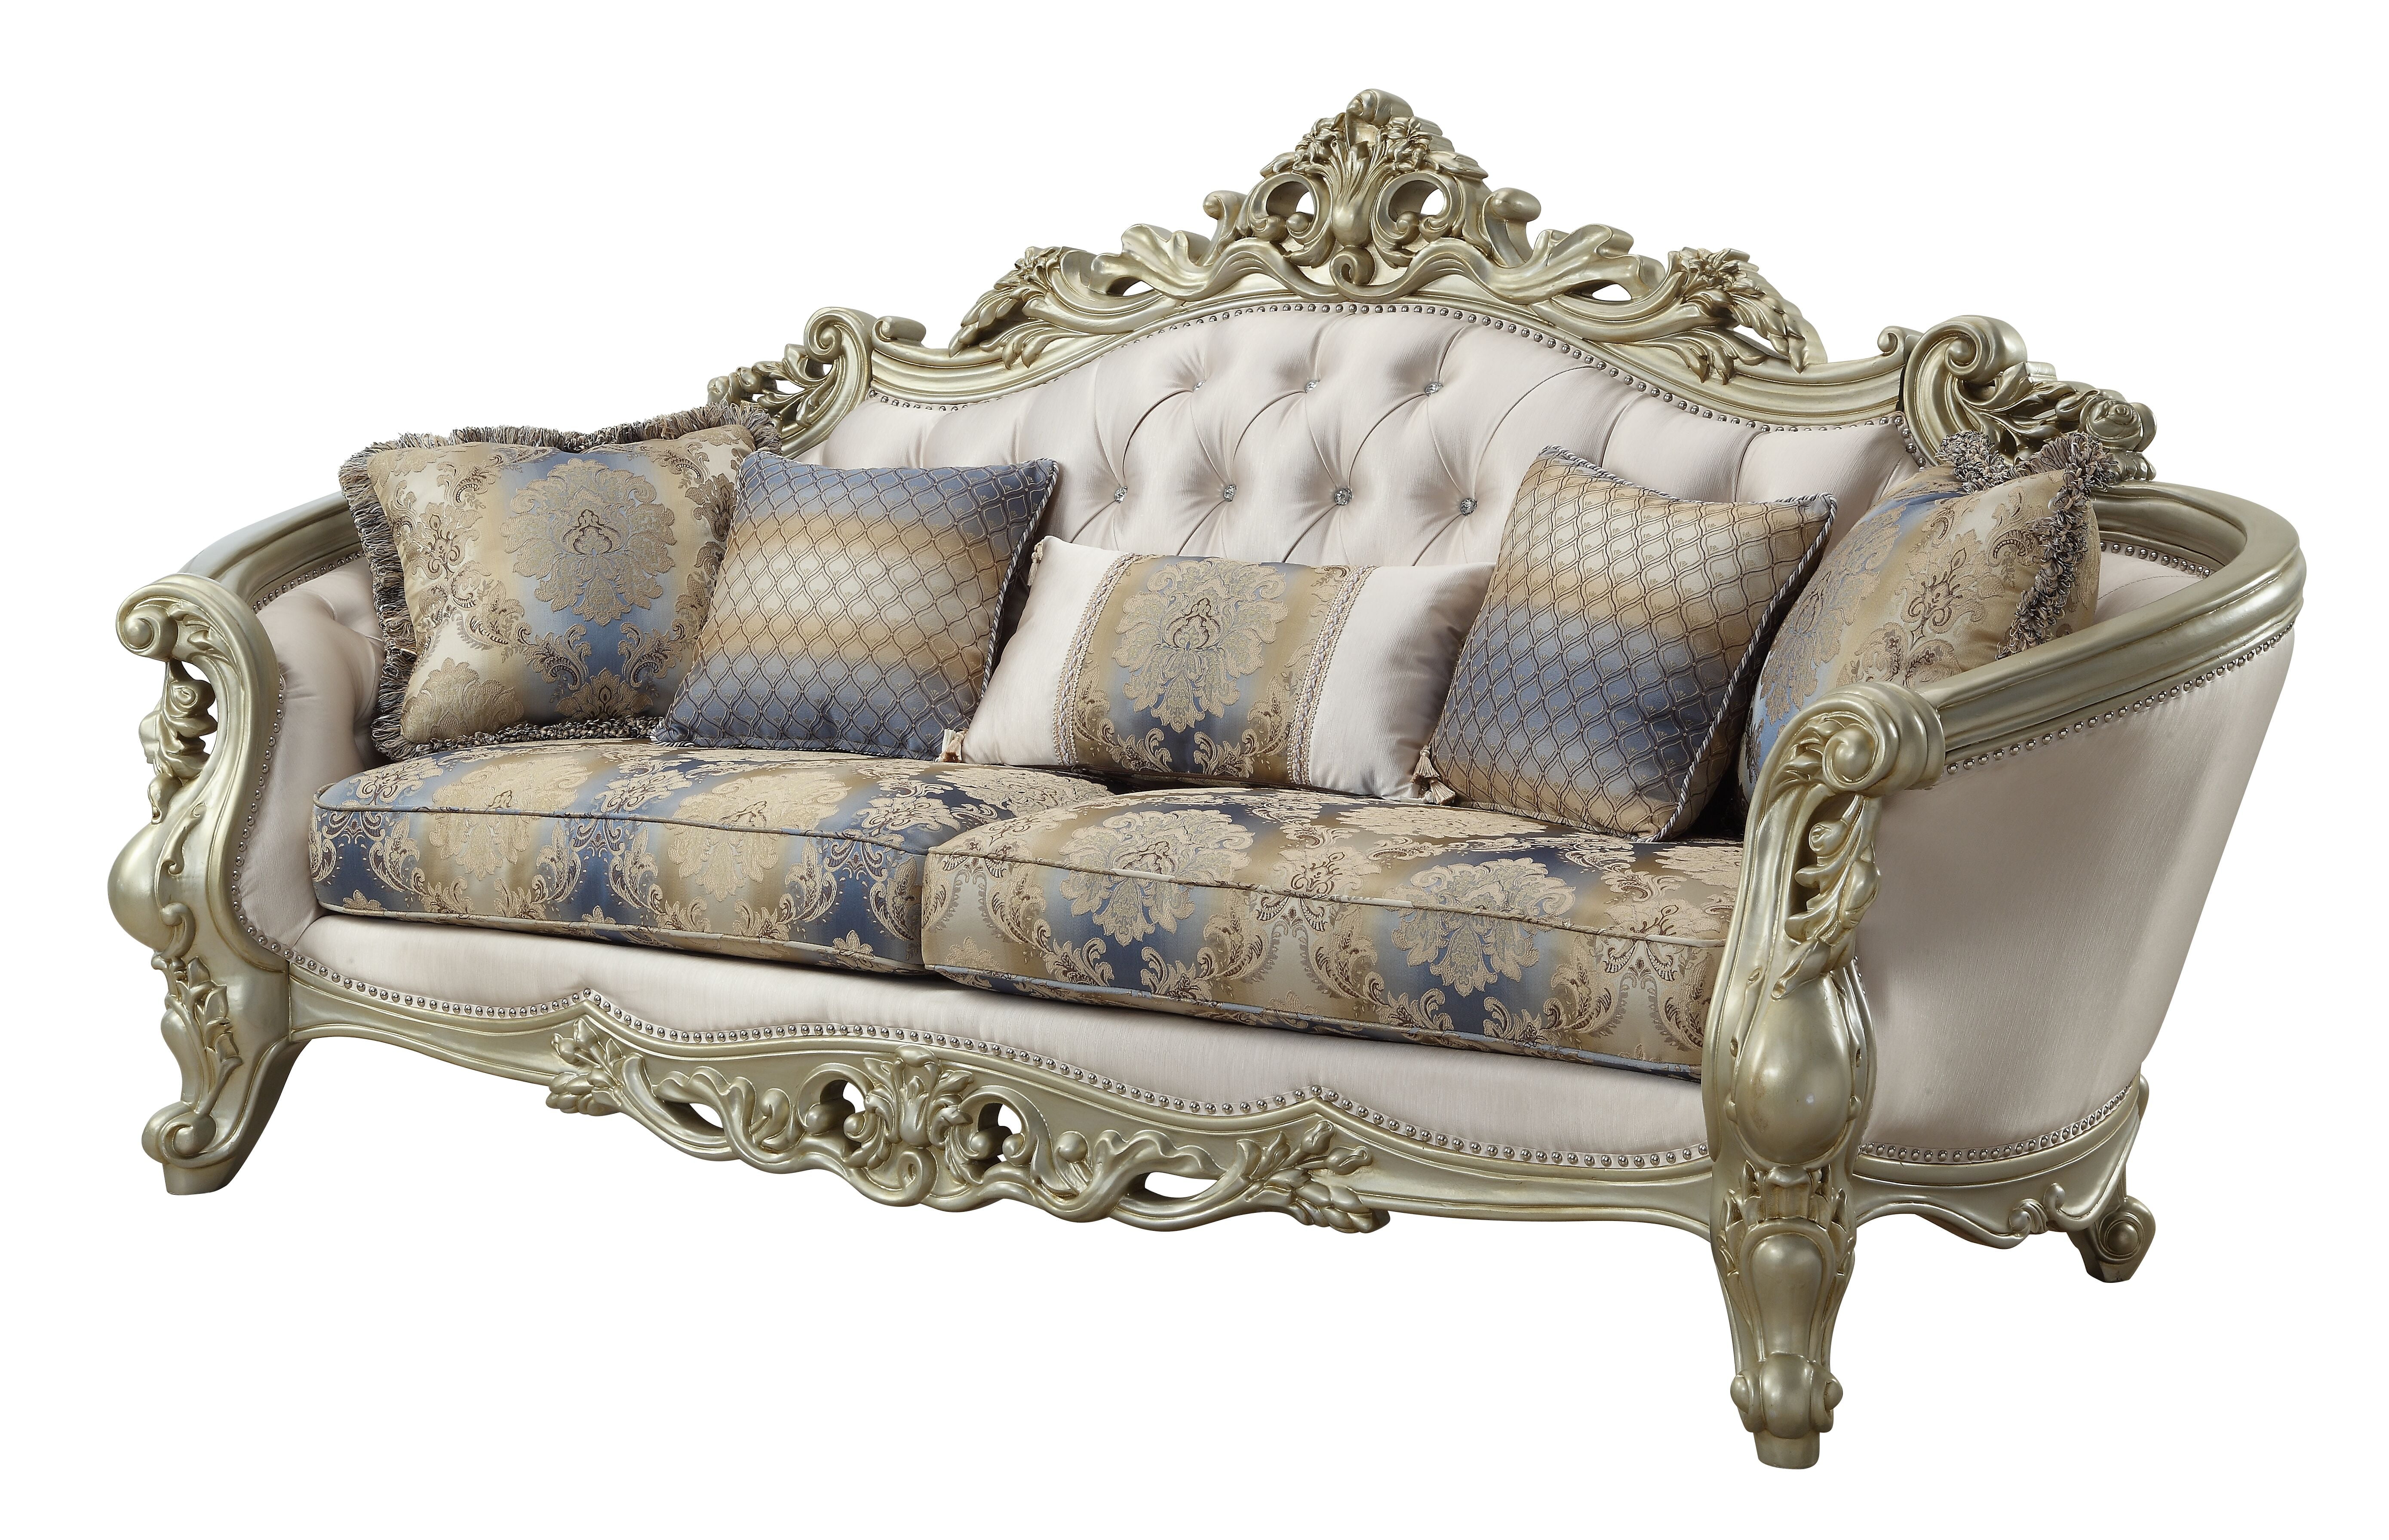 Picture of ACME 52440 Gorsedd Sofa with 5 Pillows - Fabric & Antique White - 47 x 97 x 40 in.